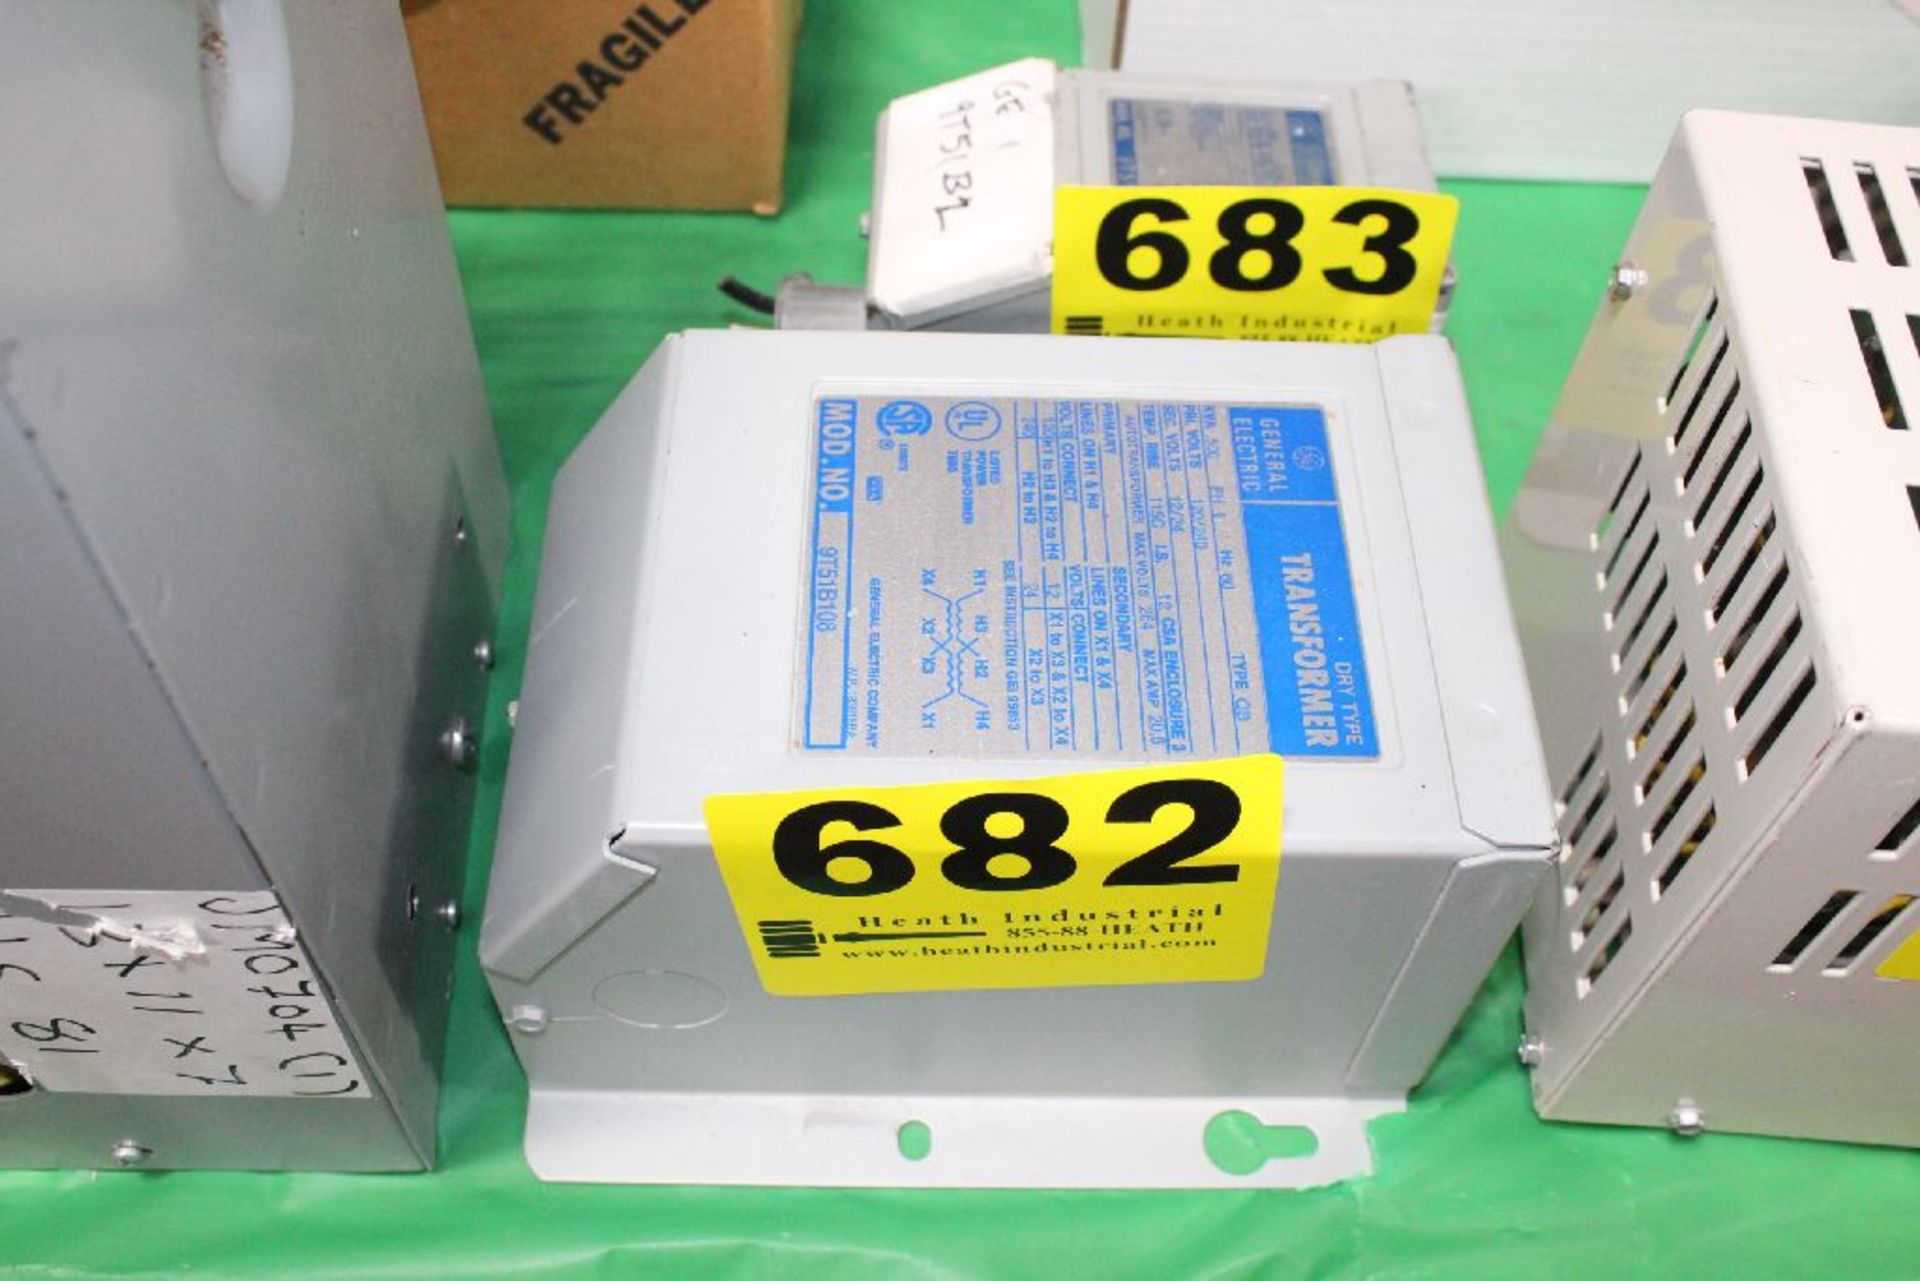 GE DRY TRANSFORMER MODEL 9T51B108, .5 KVA, PHASE 1, 60HZ. PRIMARY VOLTS 120/240, SEC. VOLTS 12/24